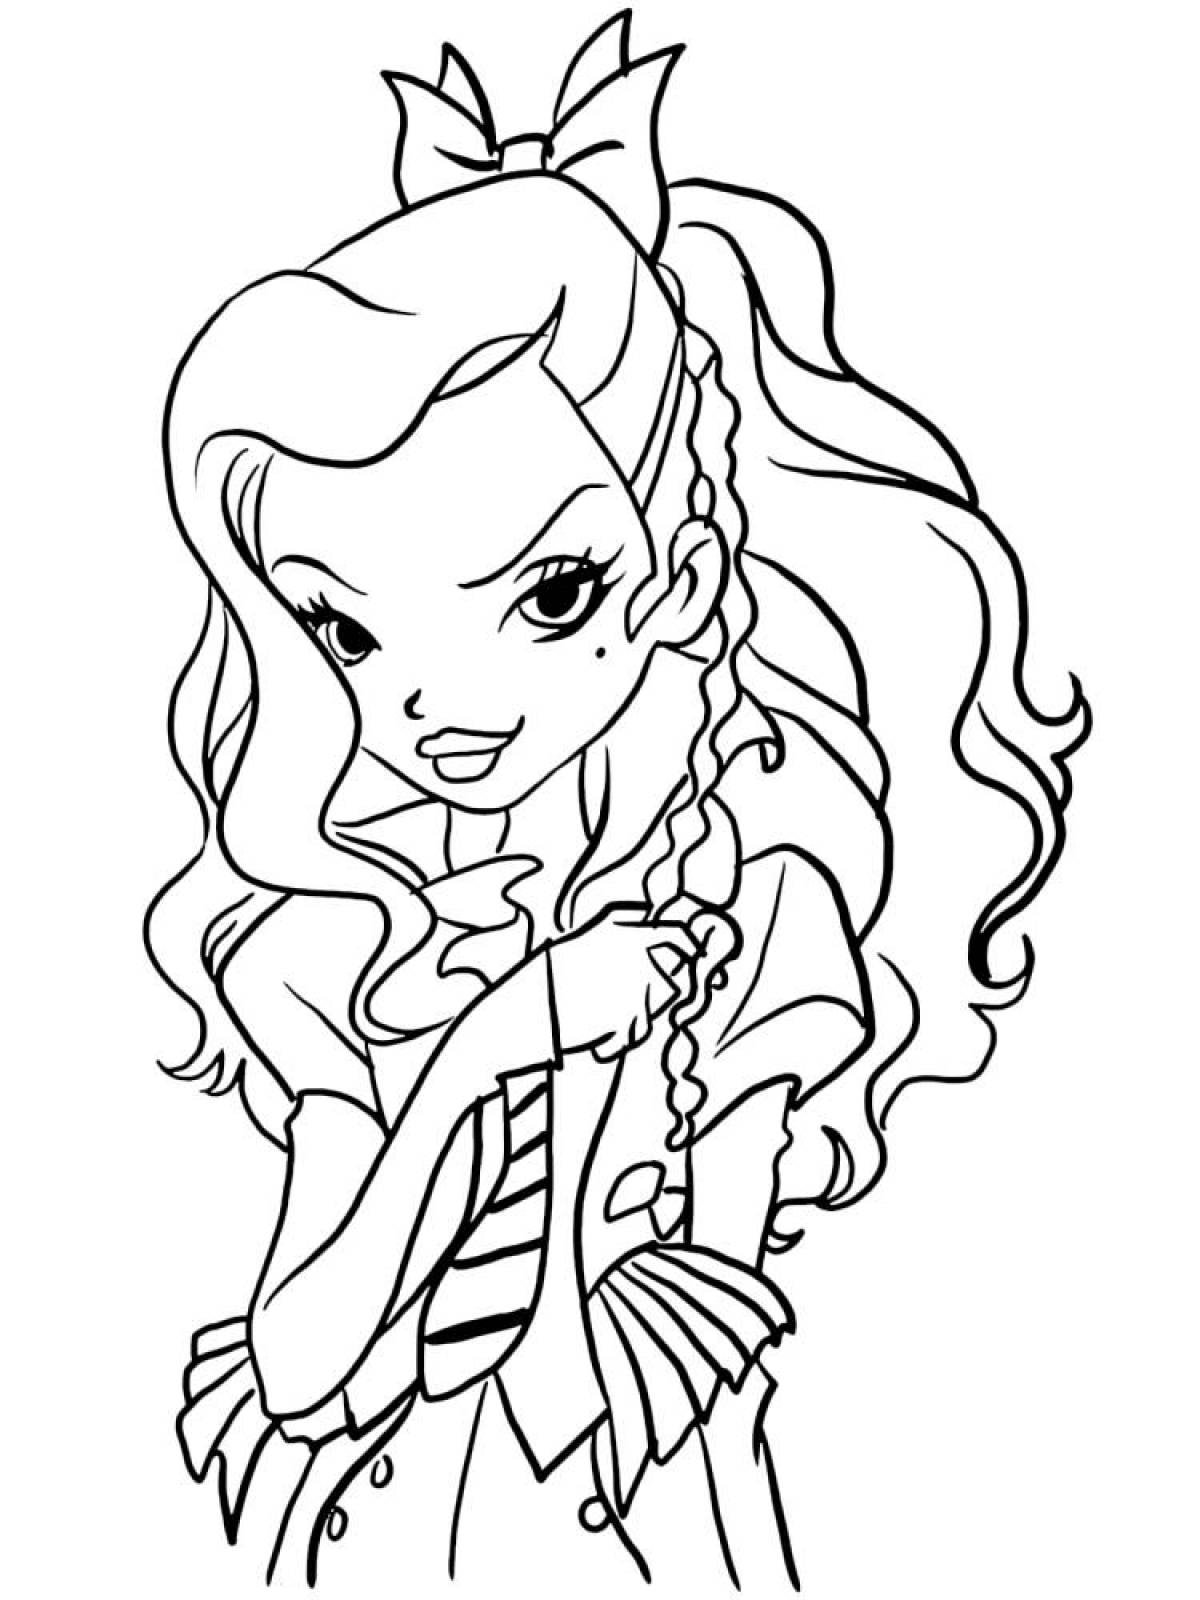 Splendid coloring page wiki show